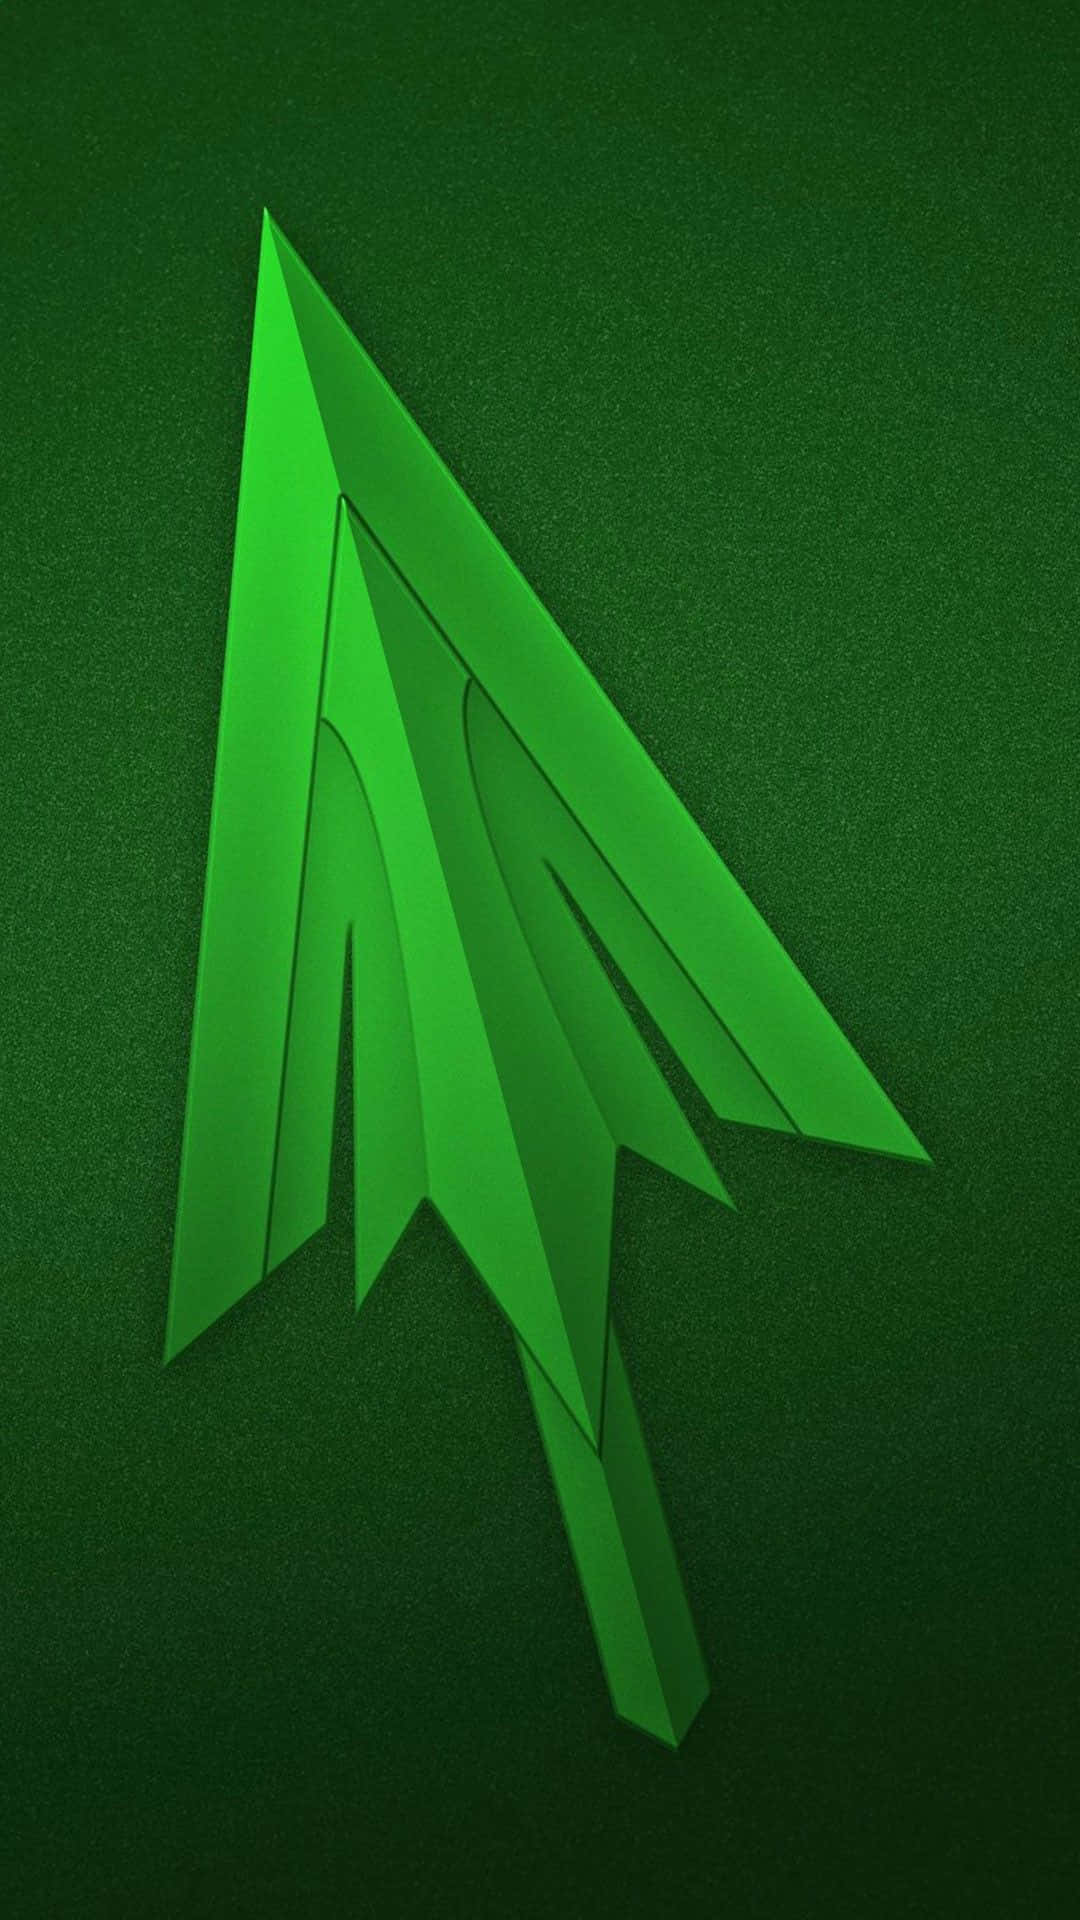 Enjoy A Pixel-perfect Mobile Experience With The Green Arrow Iphone Wallpaper